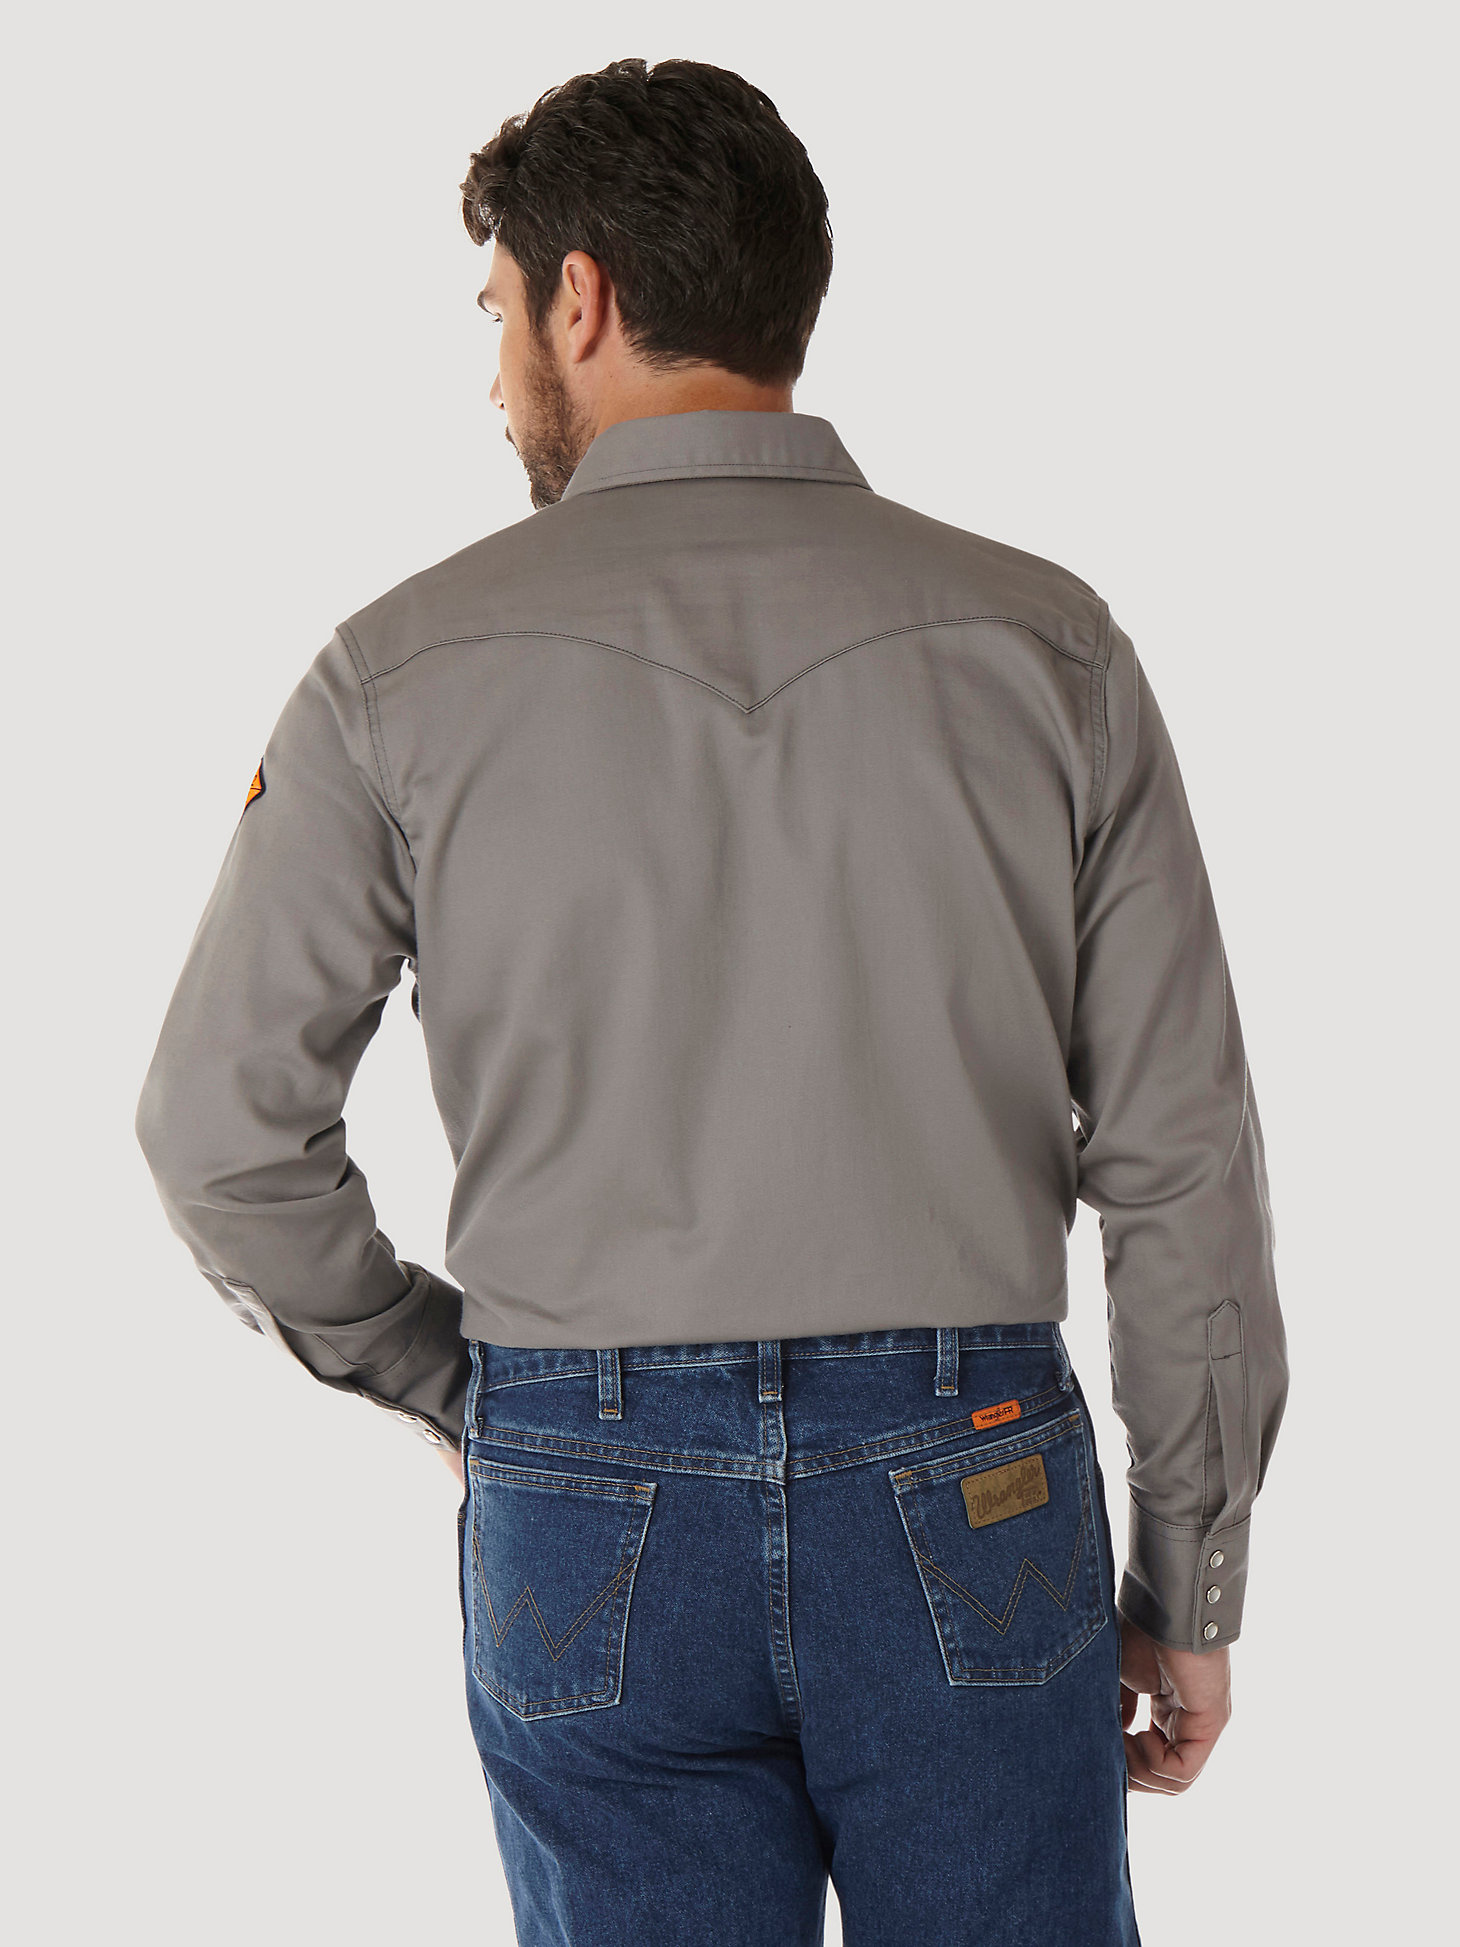 Wrangler® FR Flame Resistant Long Sleeve Solid - Charcoal in Charcoal alternative view 1